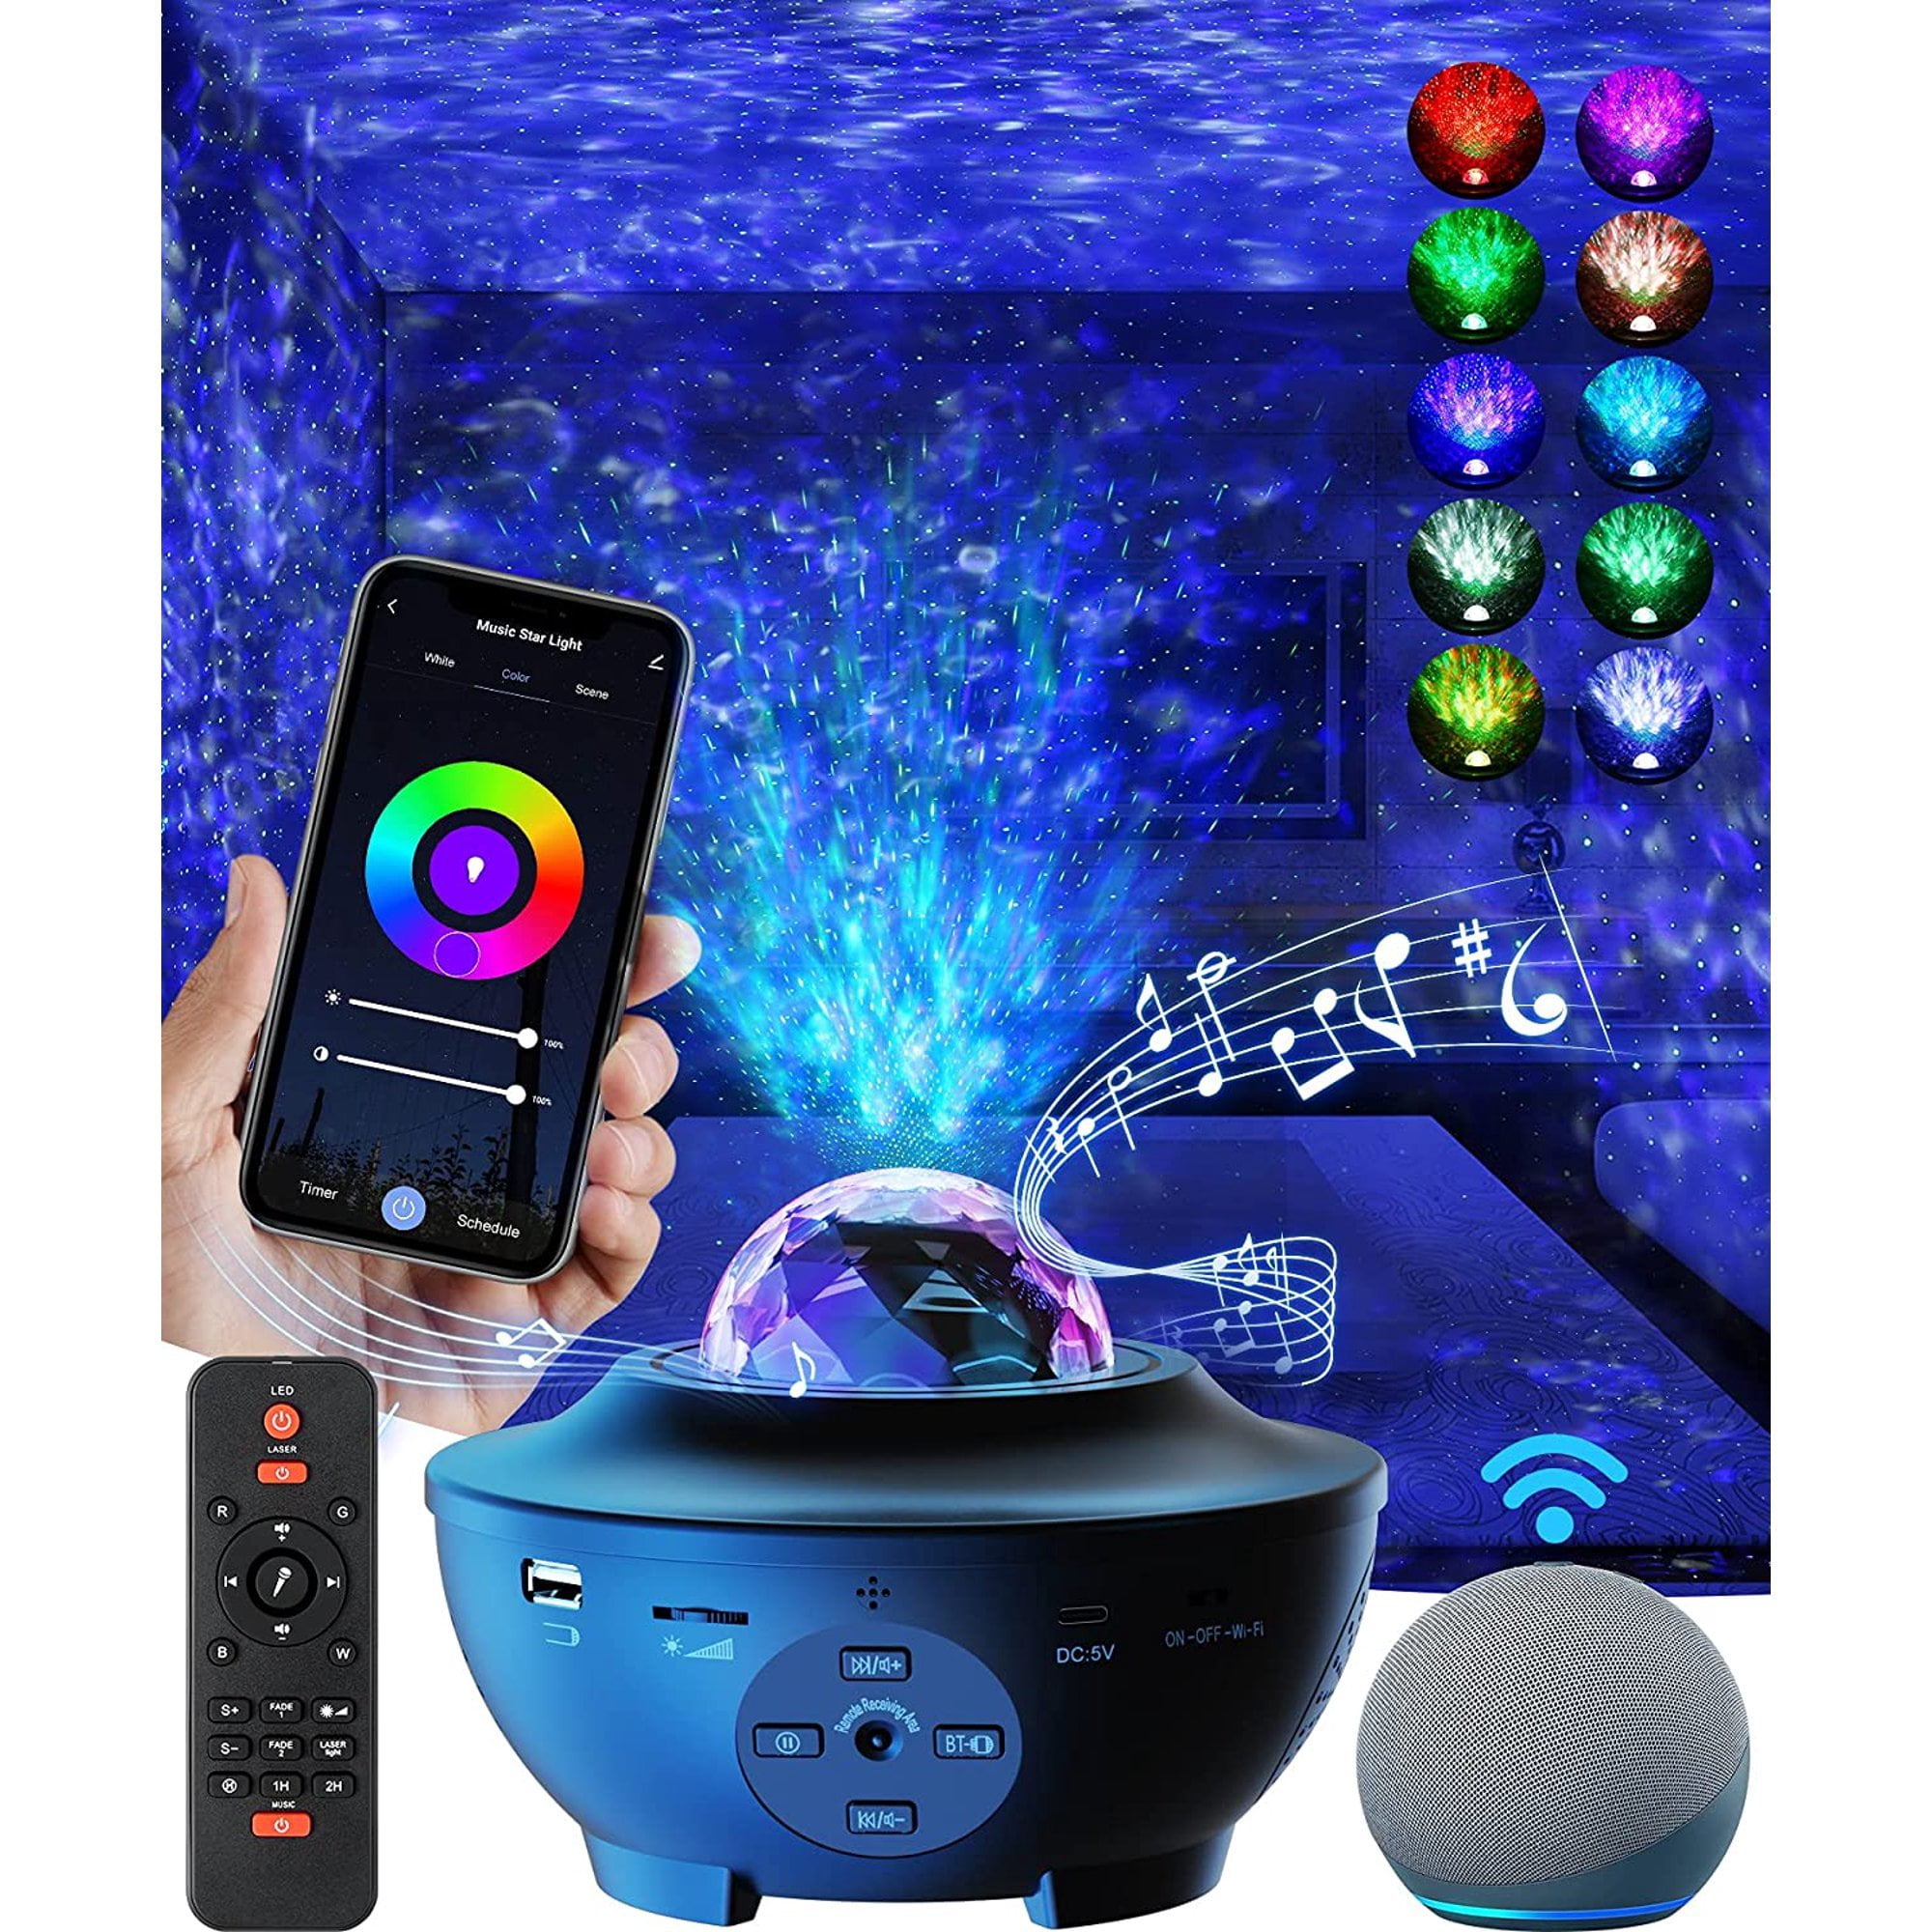 Galaxy Projector with Bluetooth Music Speaker Smart Version 3 in 1 Ocean Wave Projector Timer & Smart App Remote and Voice Control Star Sky Night Light for Kids Bedroom/Game Rooms/Home Theatre/Room Decor/Night Light Ambiance Star Projector